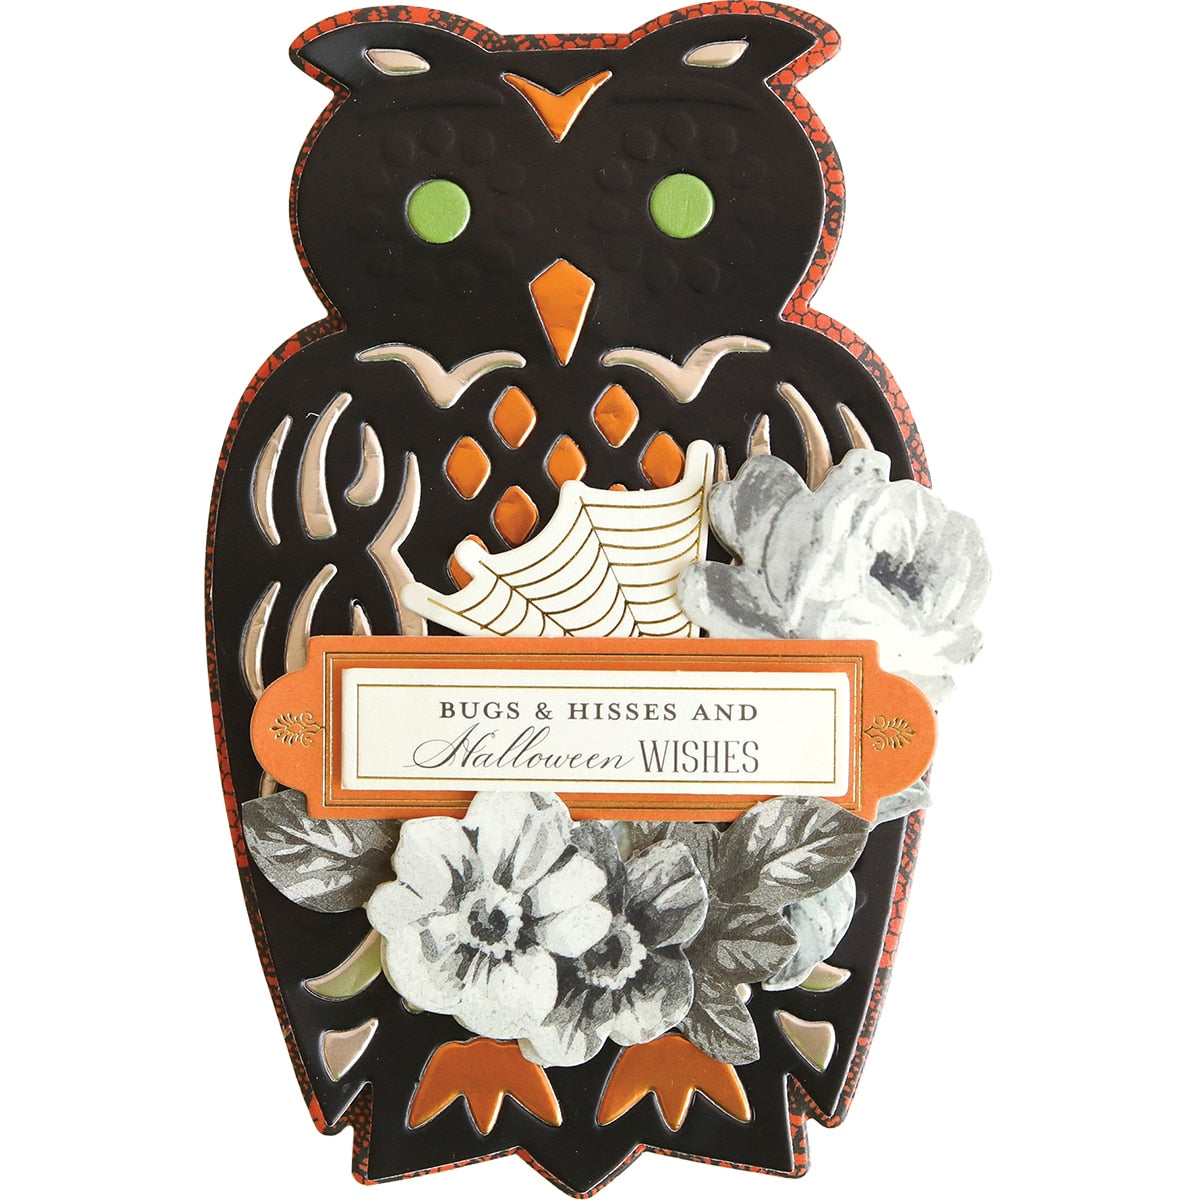 A black and orange Falloween Gift Card Holder with flowers on it.